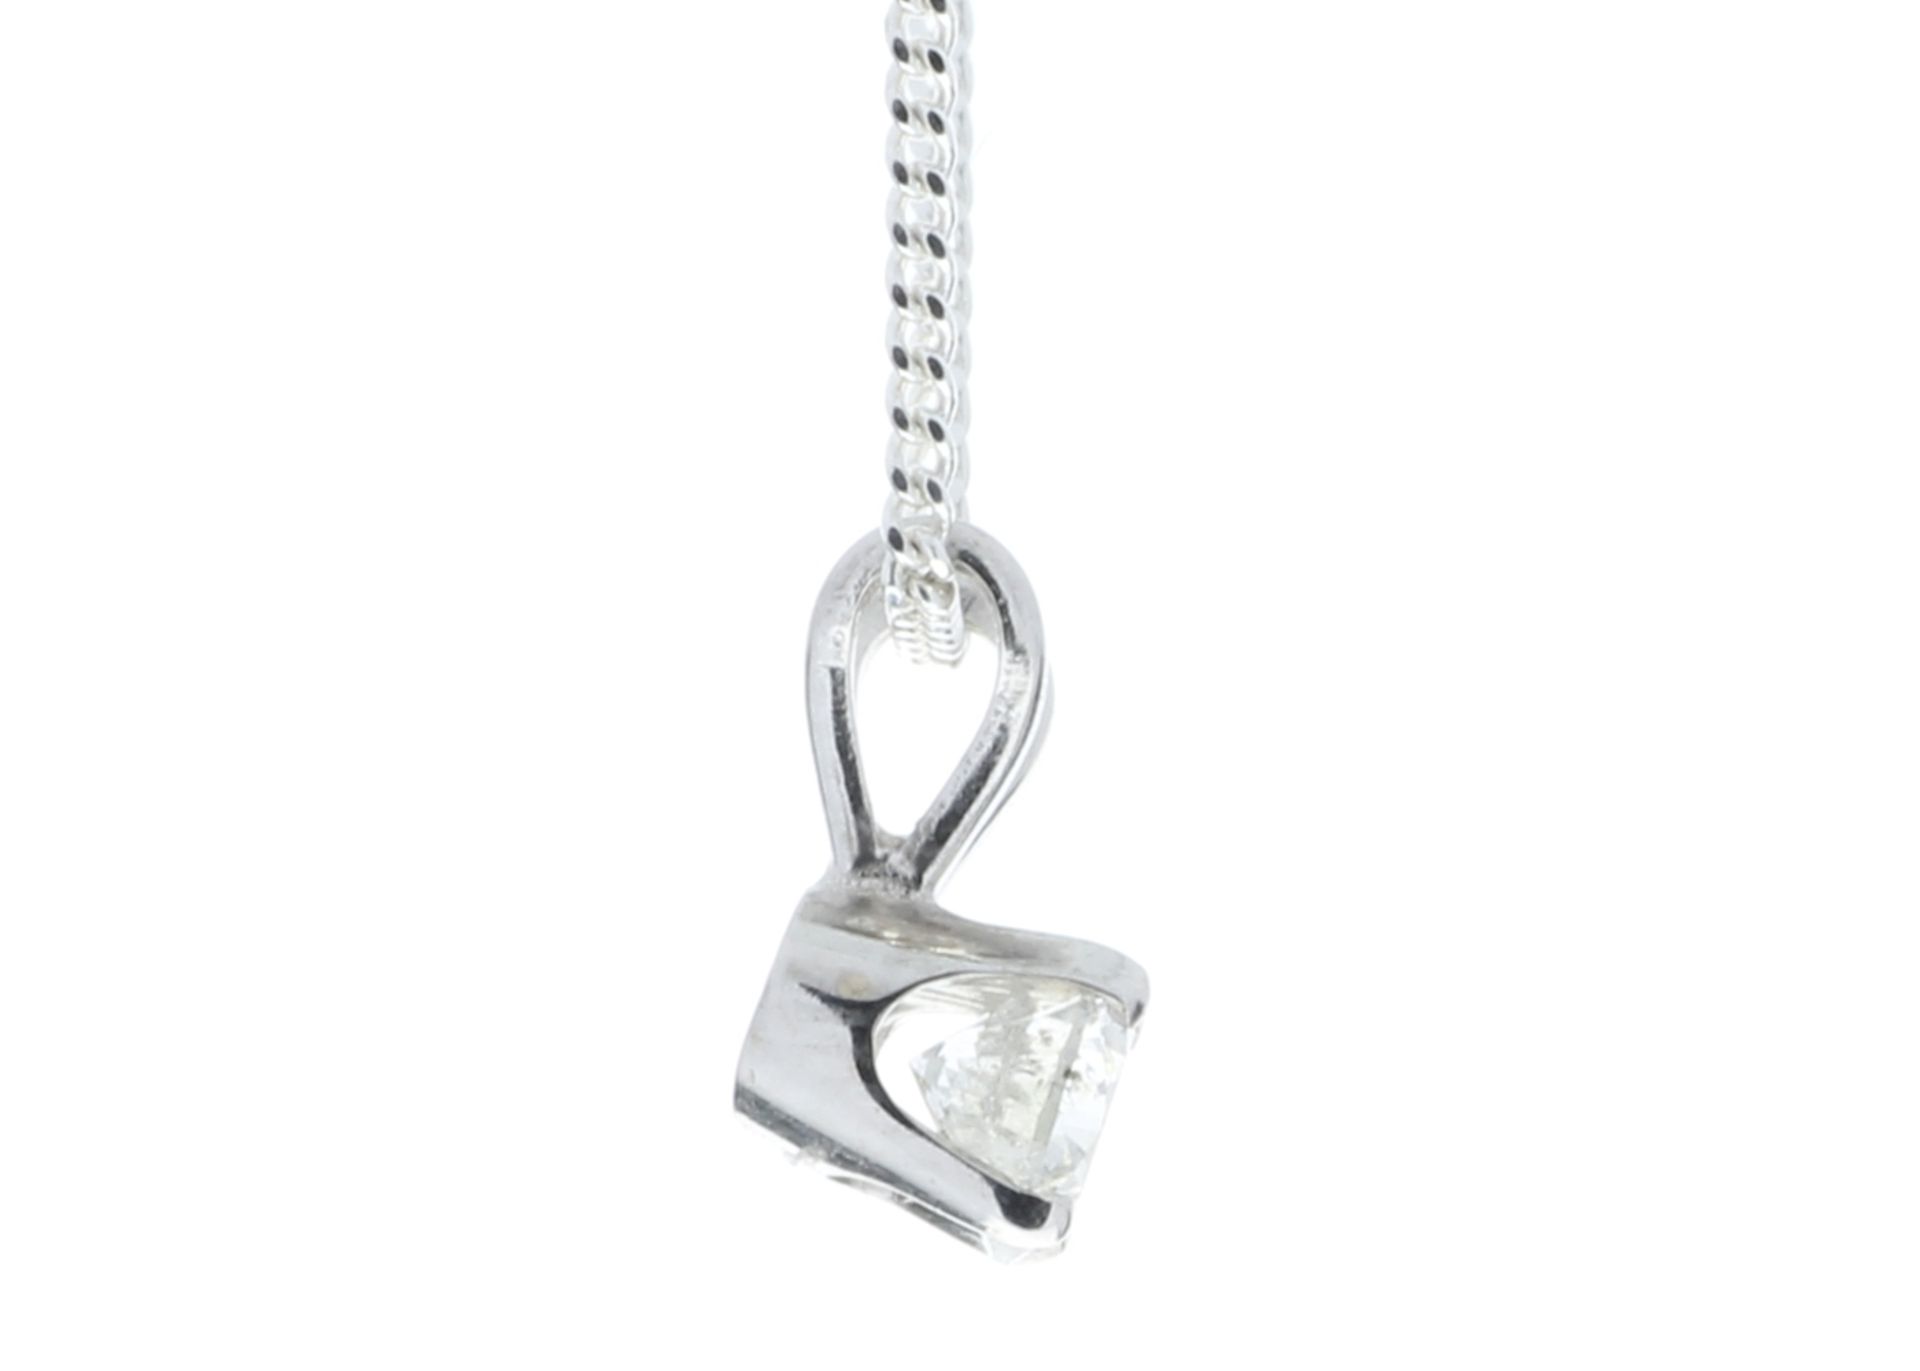 9ct White Gold Single Stone Claw Set Diamond Pendant 0.20 Carats - Valued by GIE £2,781.00 - 9ct - Image 3 of 6